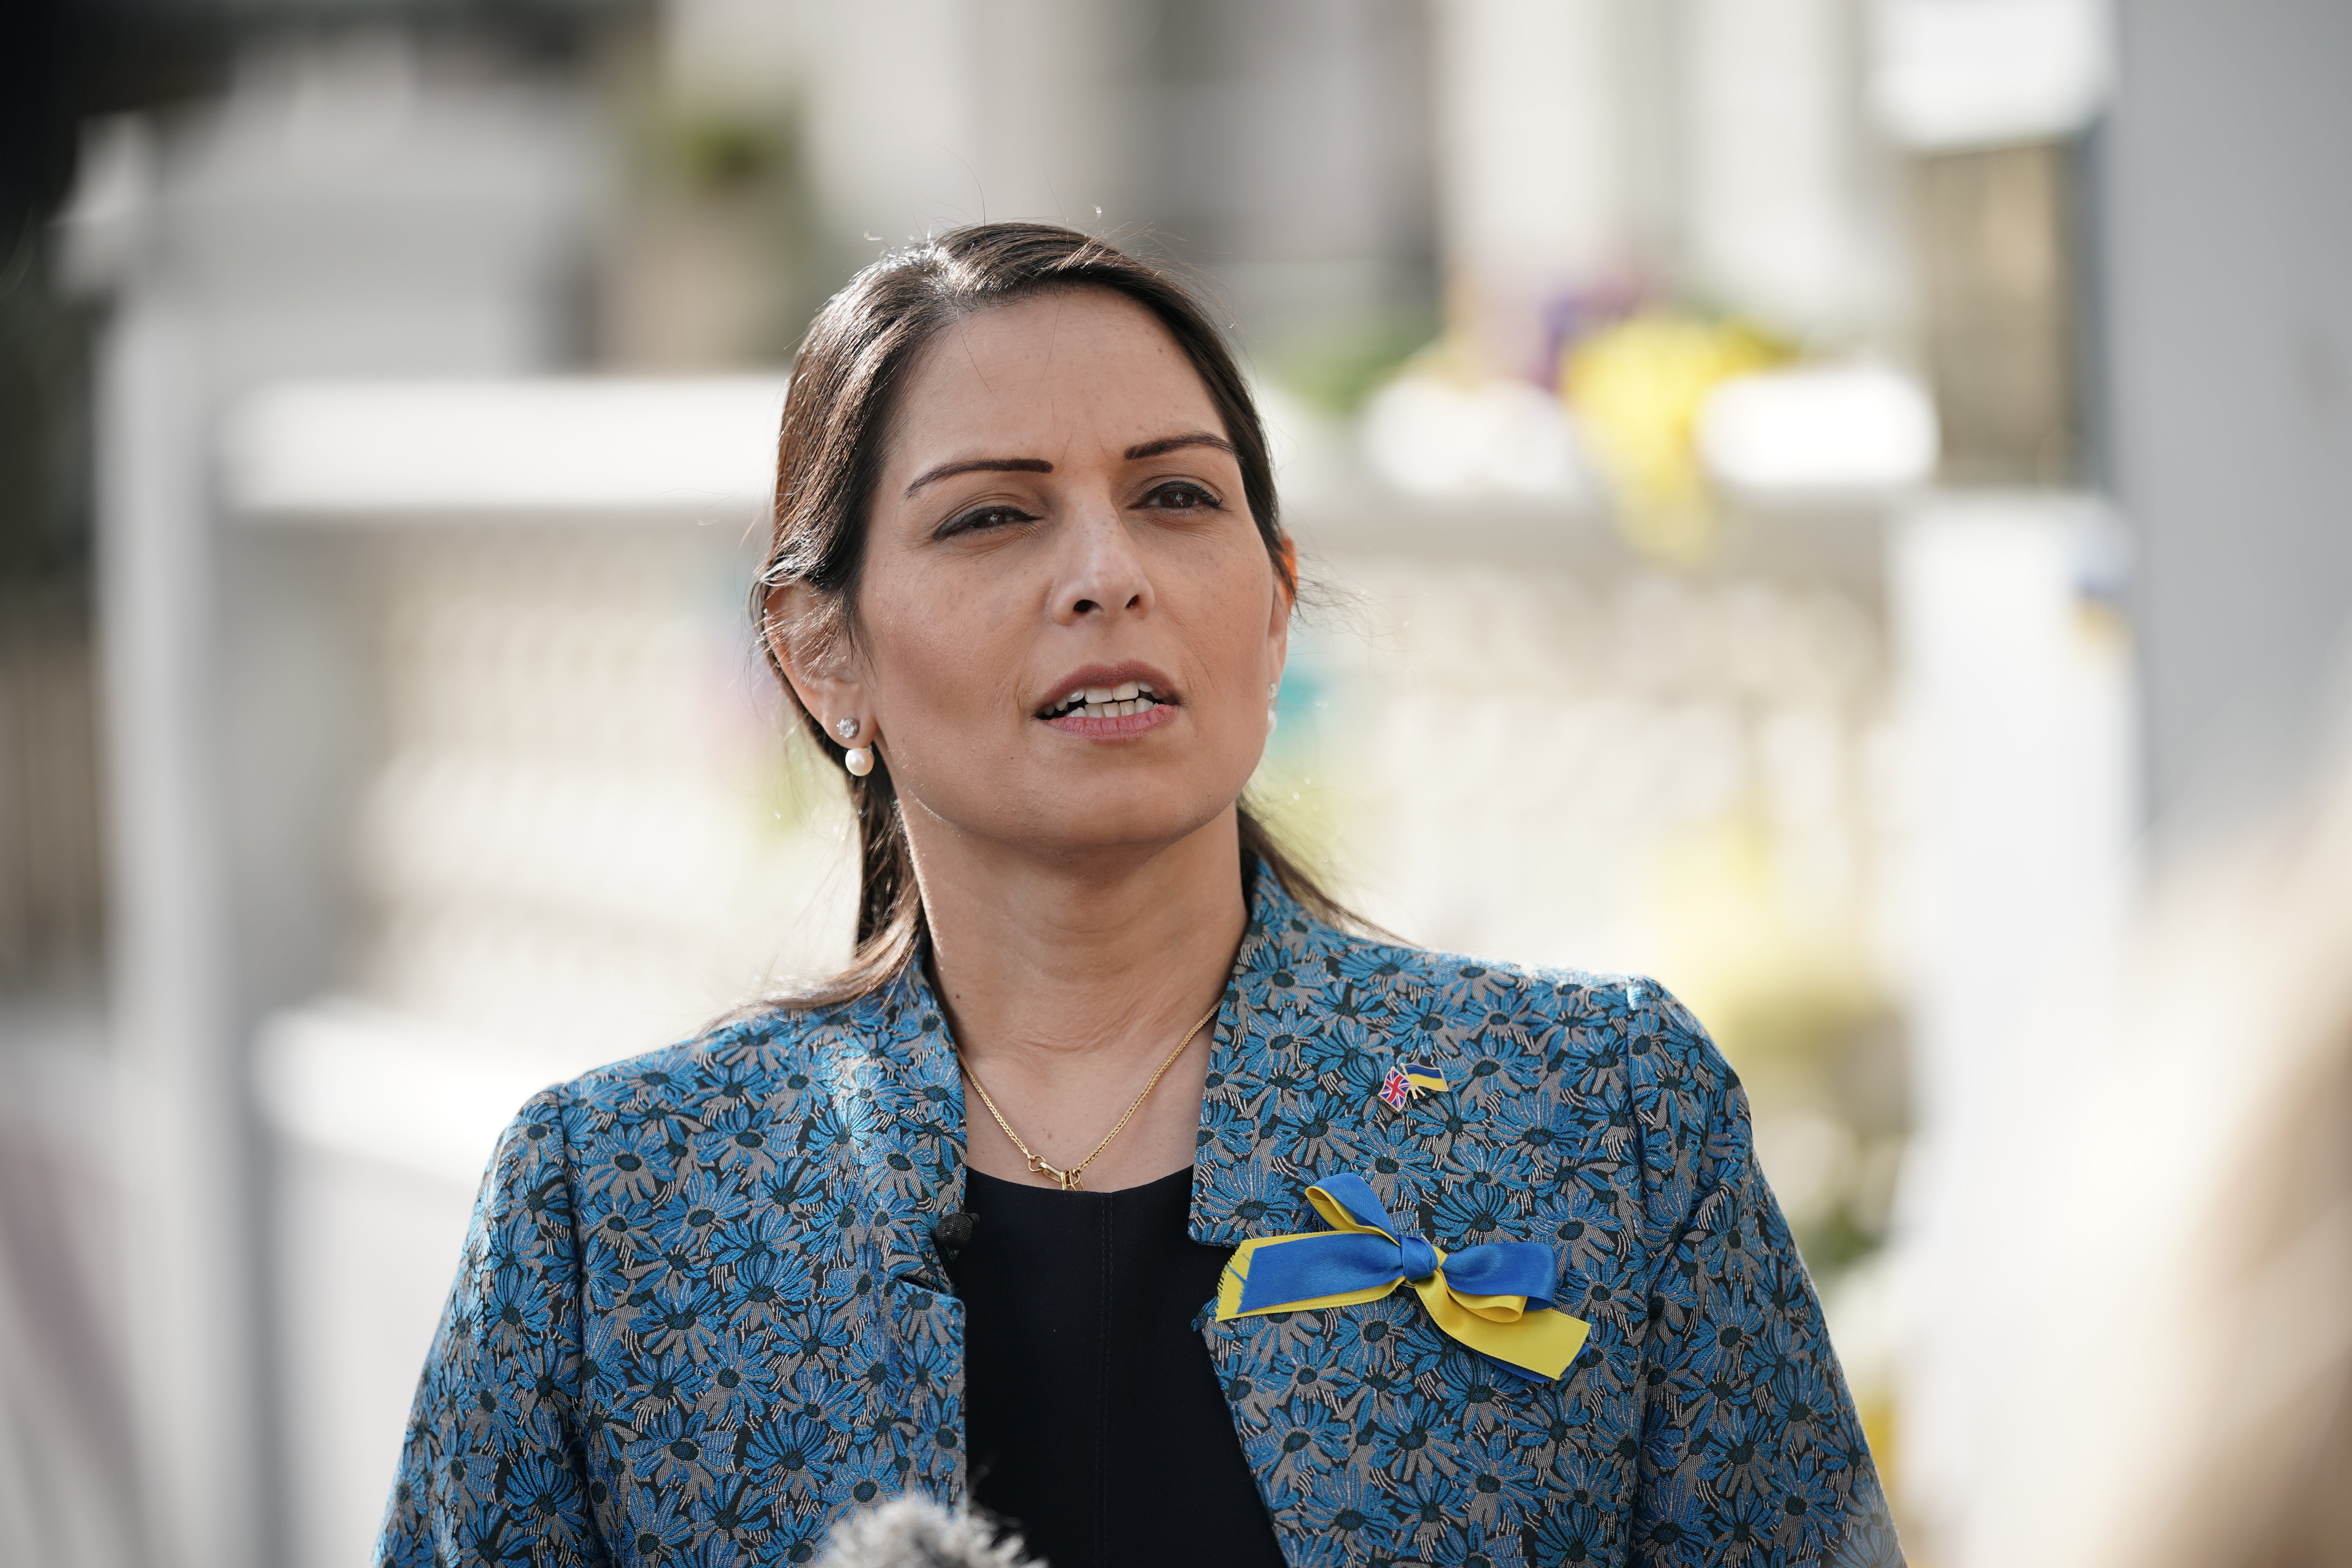 Home Secretary Priti Patel is to speak at a policing conference on Tuesday